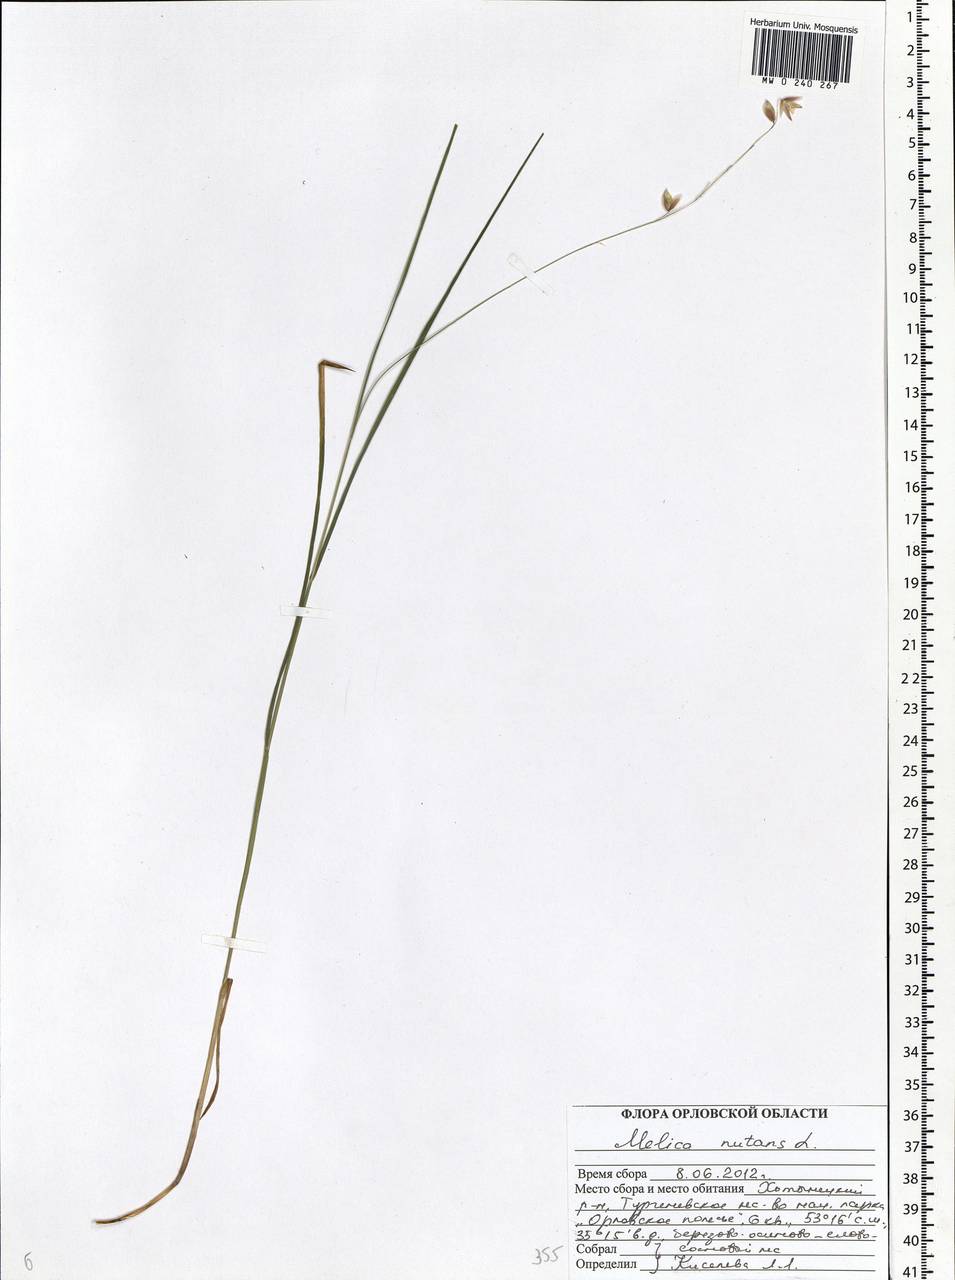 Melica nutans L., Eastern Europe, Central forest-and-steppe region (E6) (Russia)